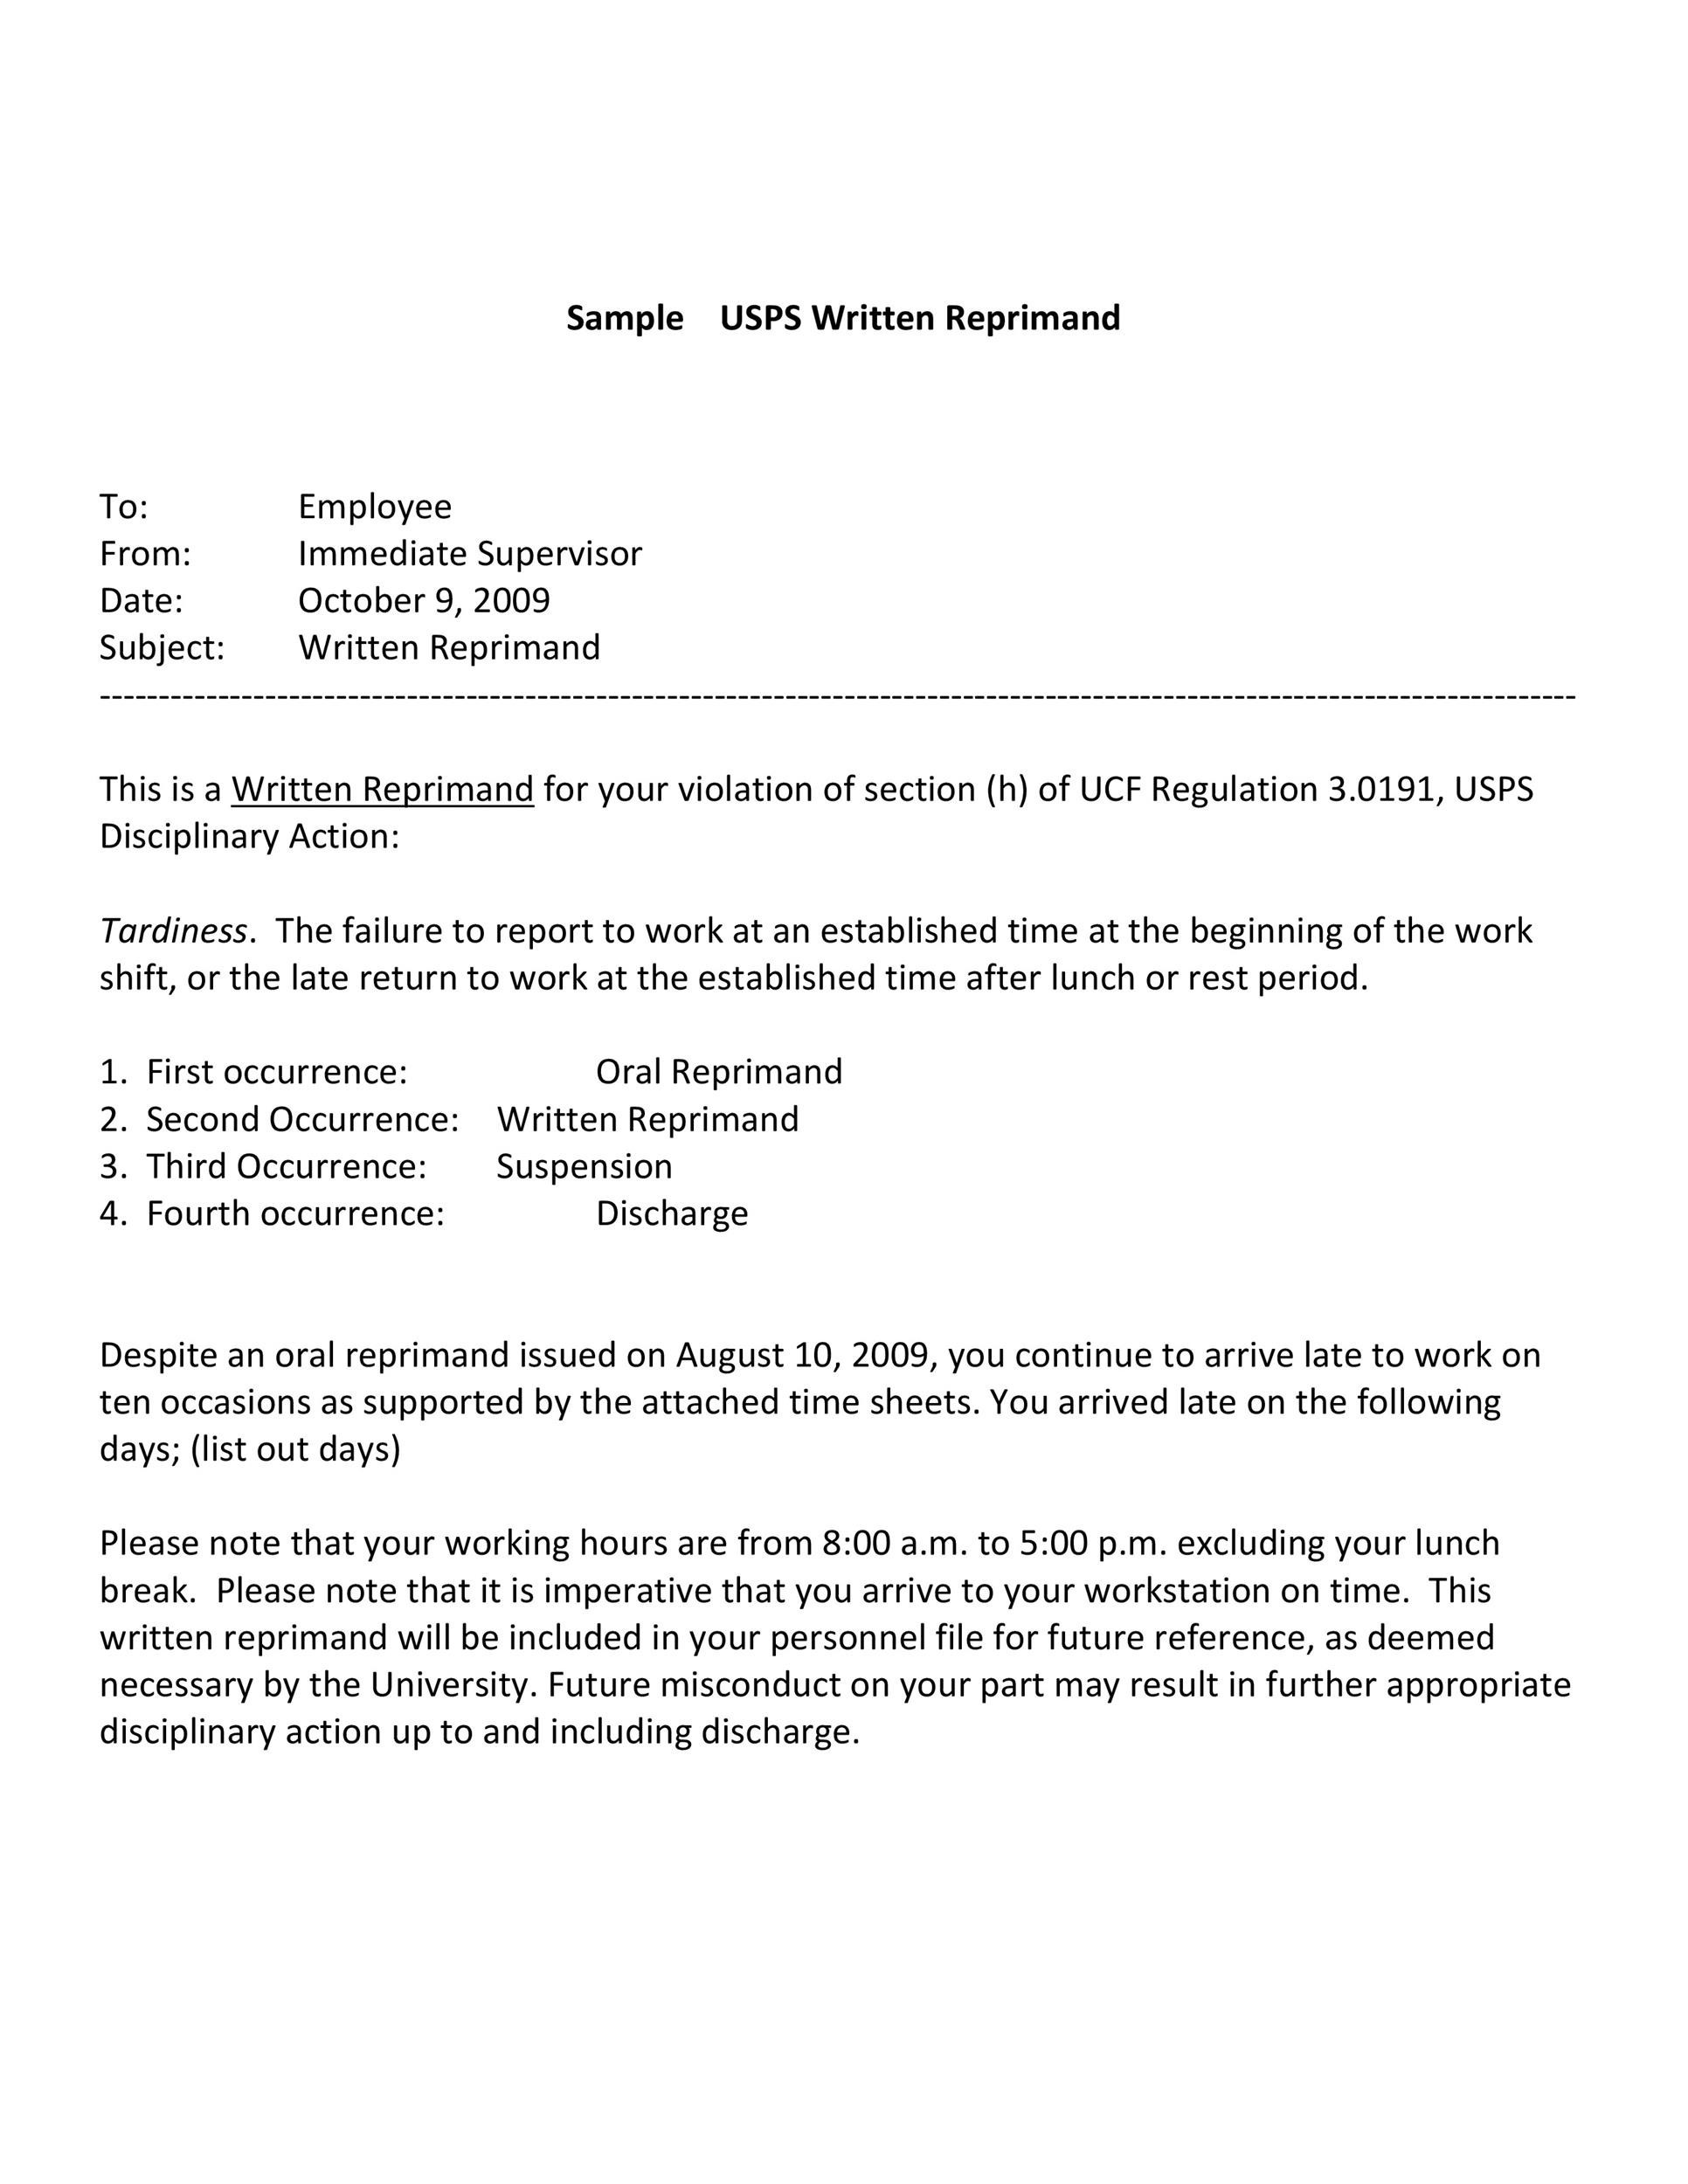 Sample Letter Of Reprimand For Insubordination from templatelab.com